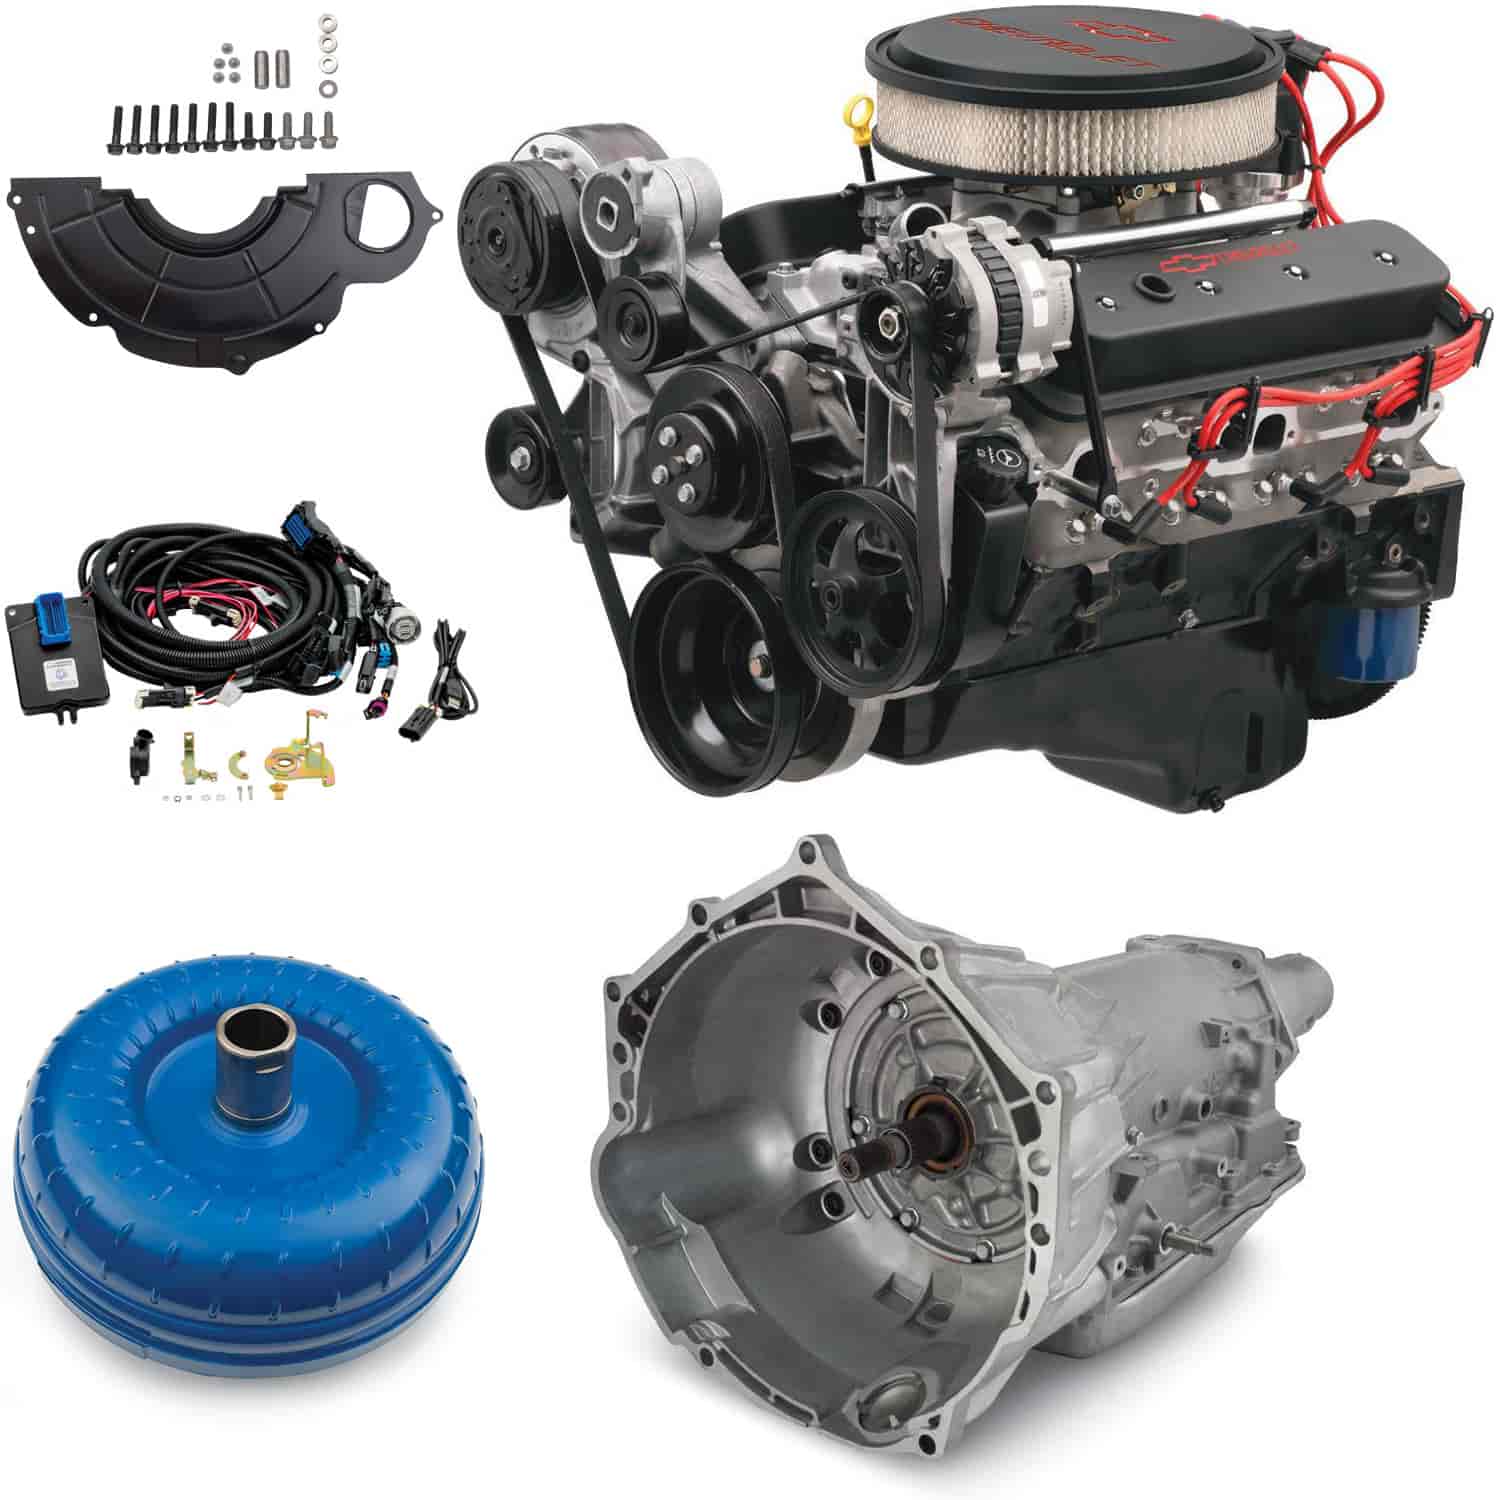 Chevrolet Performance k Sp3 Efi Turn Key 3 Small Block Chevy Connect Cruise Powertrain System With Supermatic 4l70 E Automatic Transmission Jegs